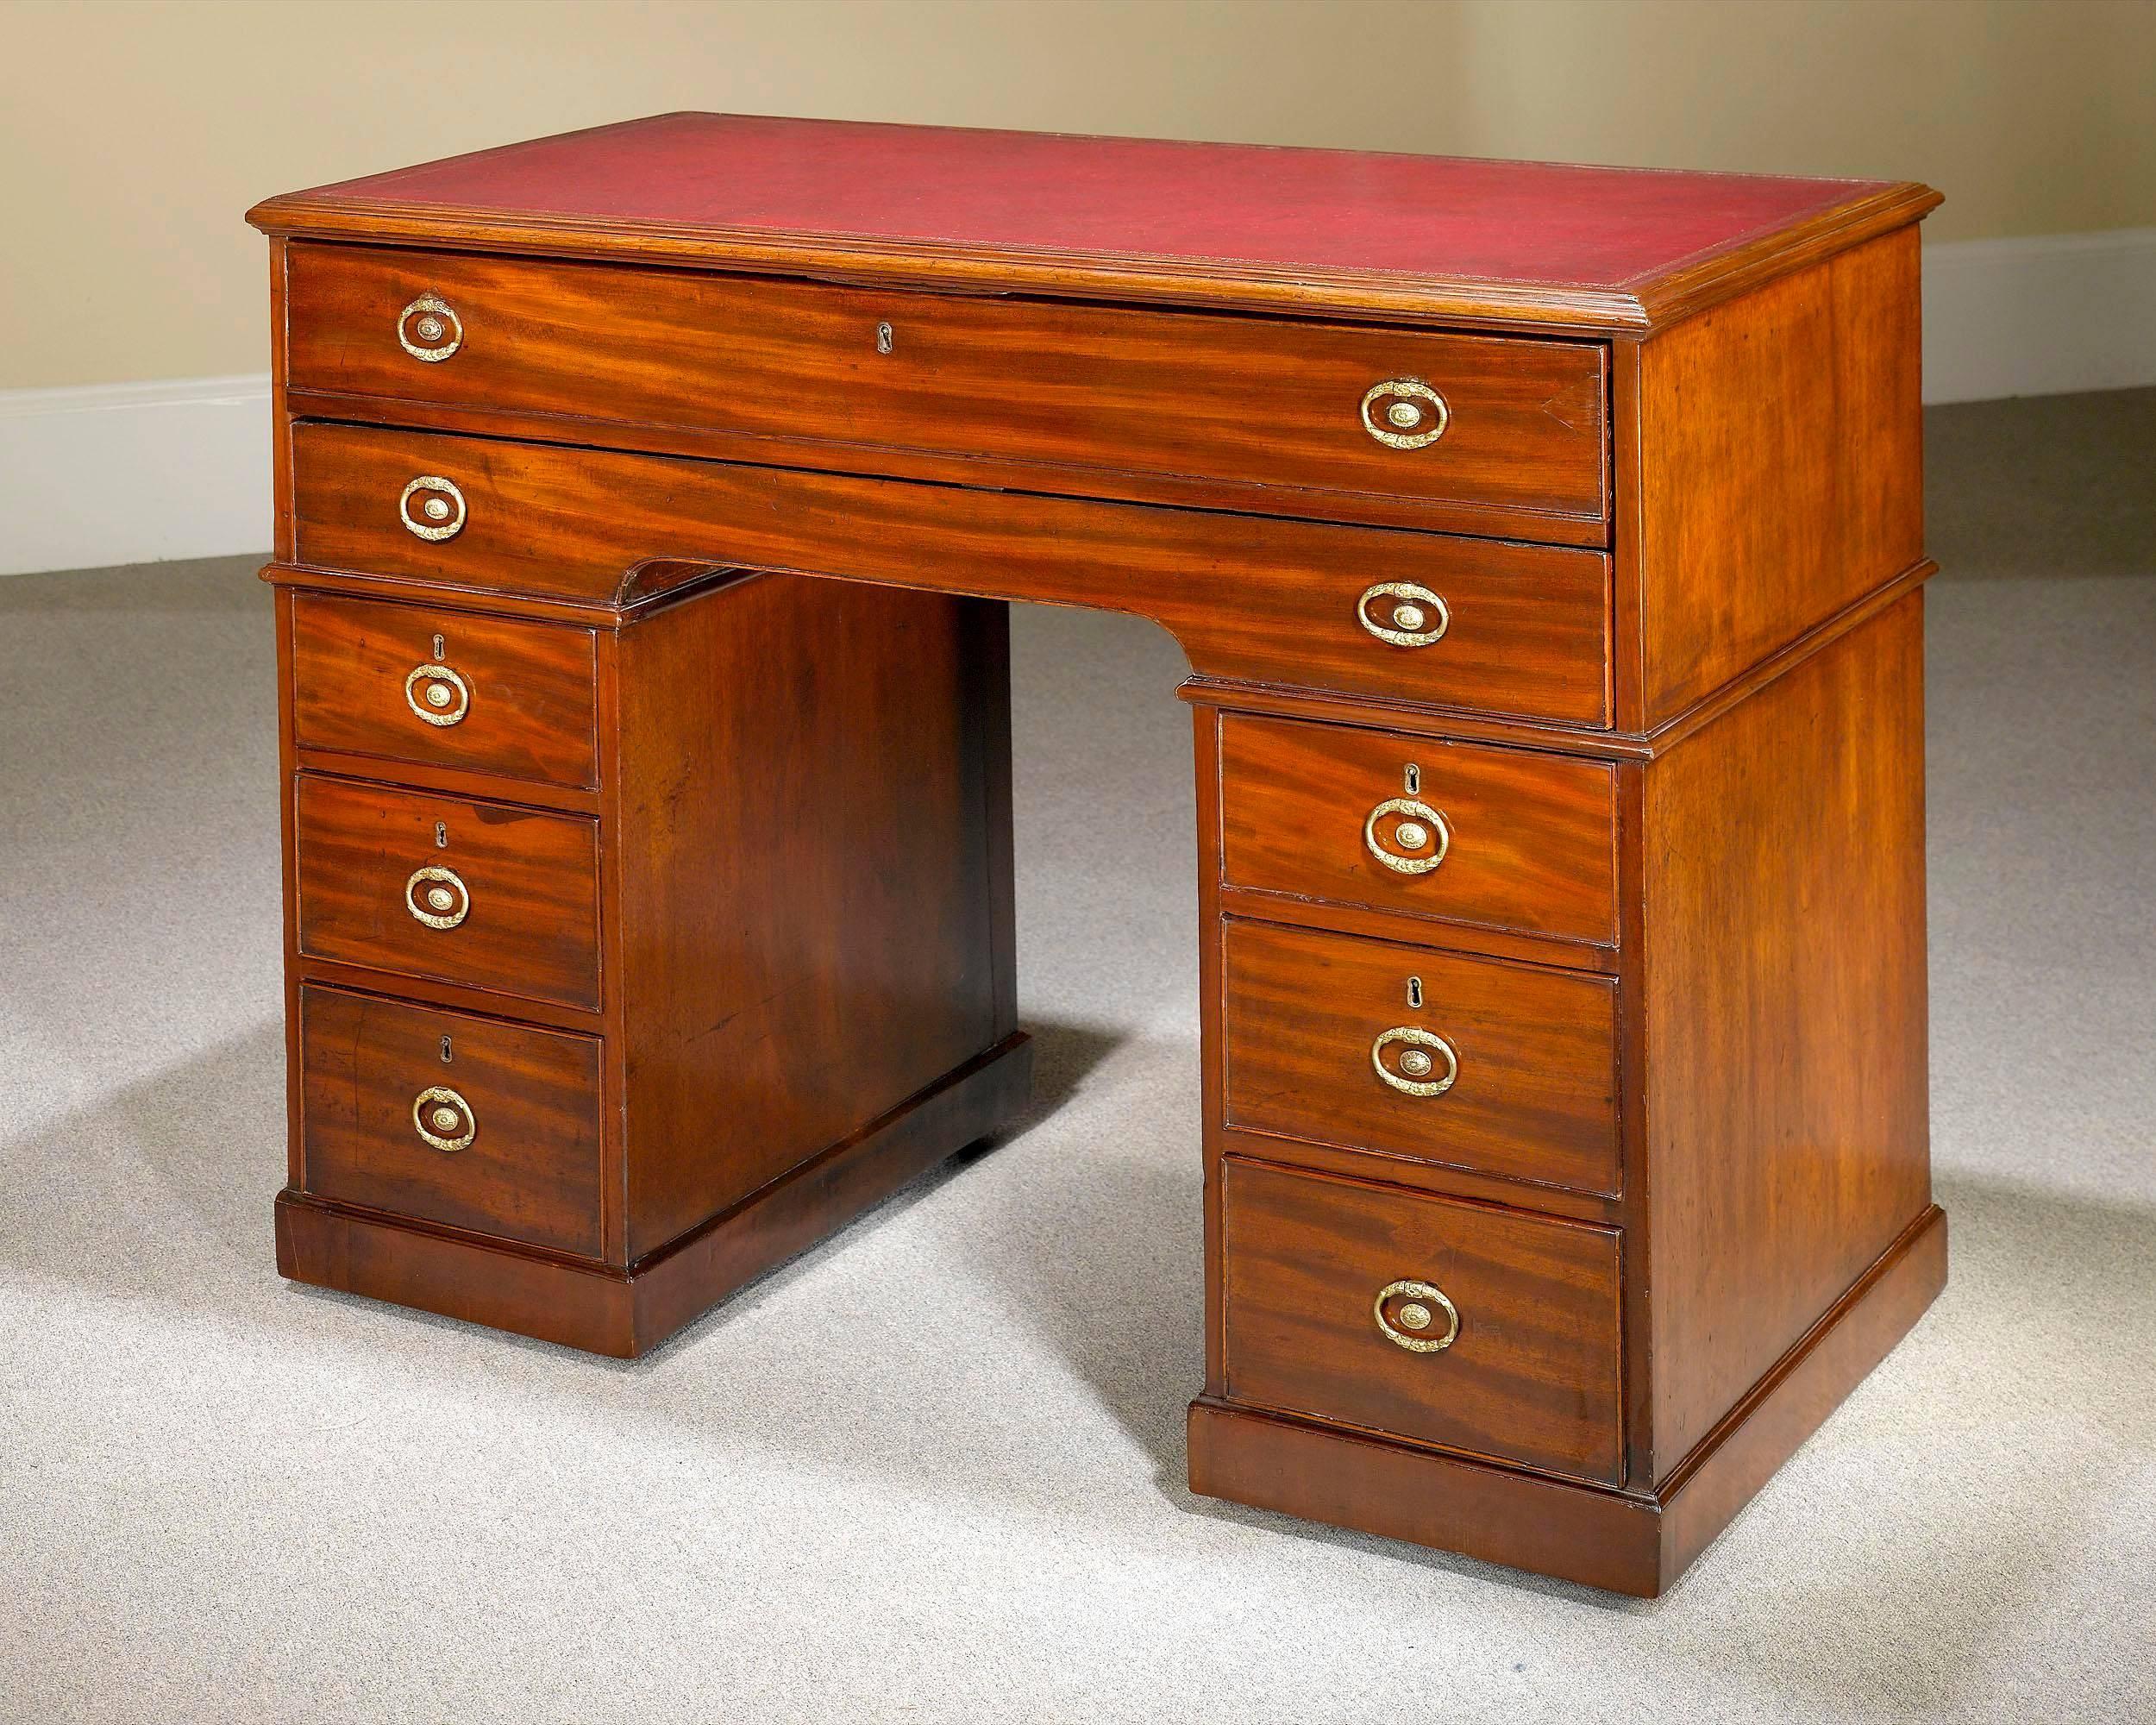 Regency 18th Century Architect's Desk by Gillows of Lancaster